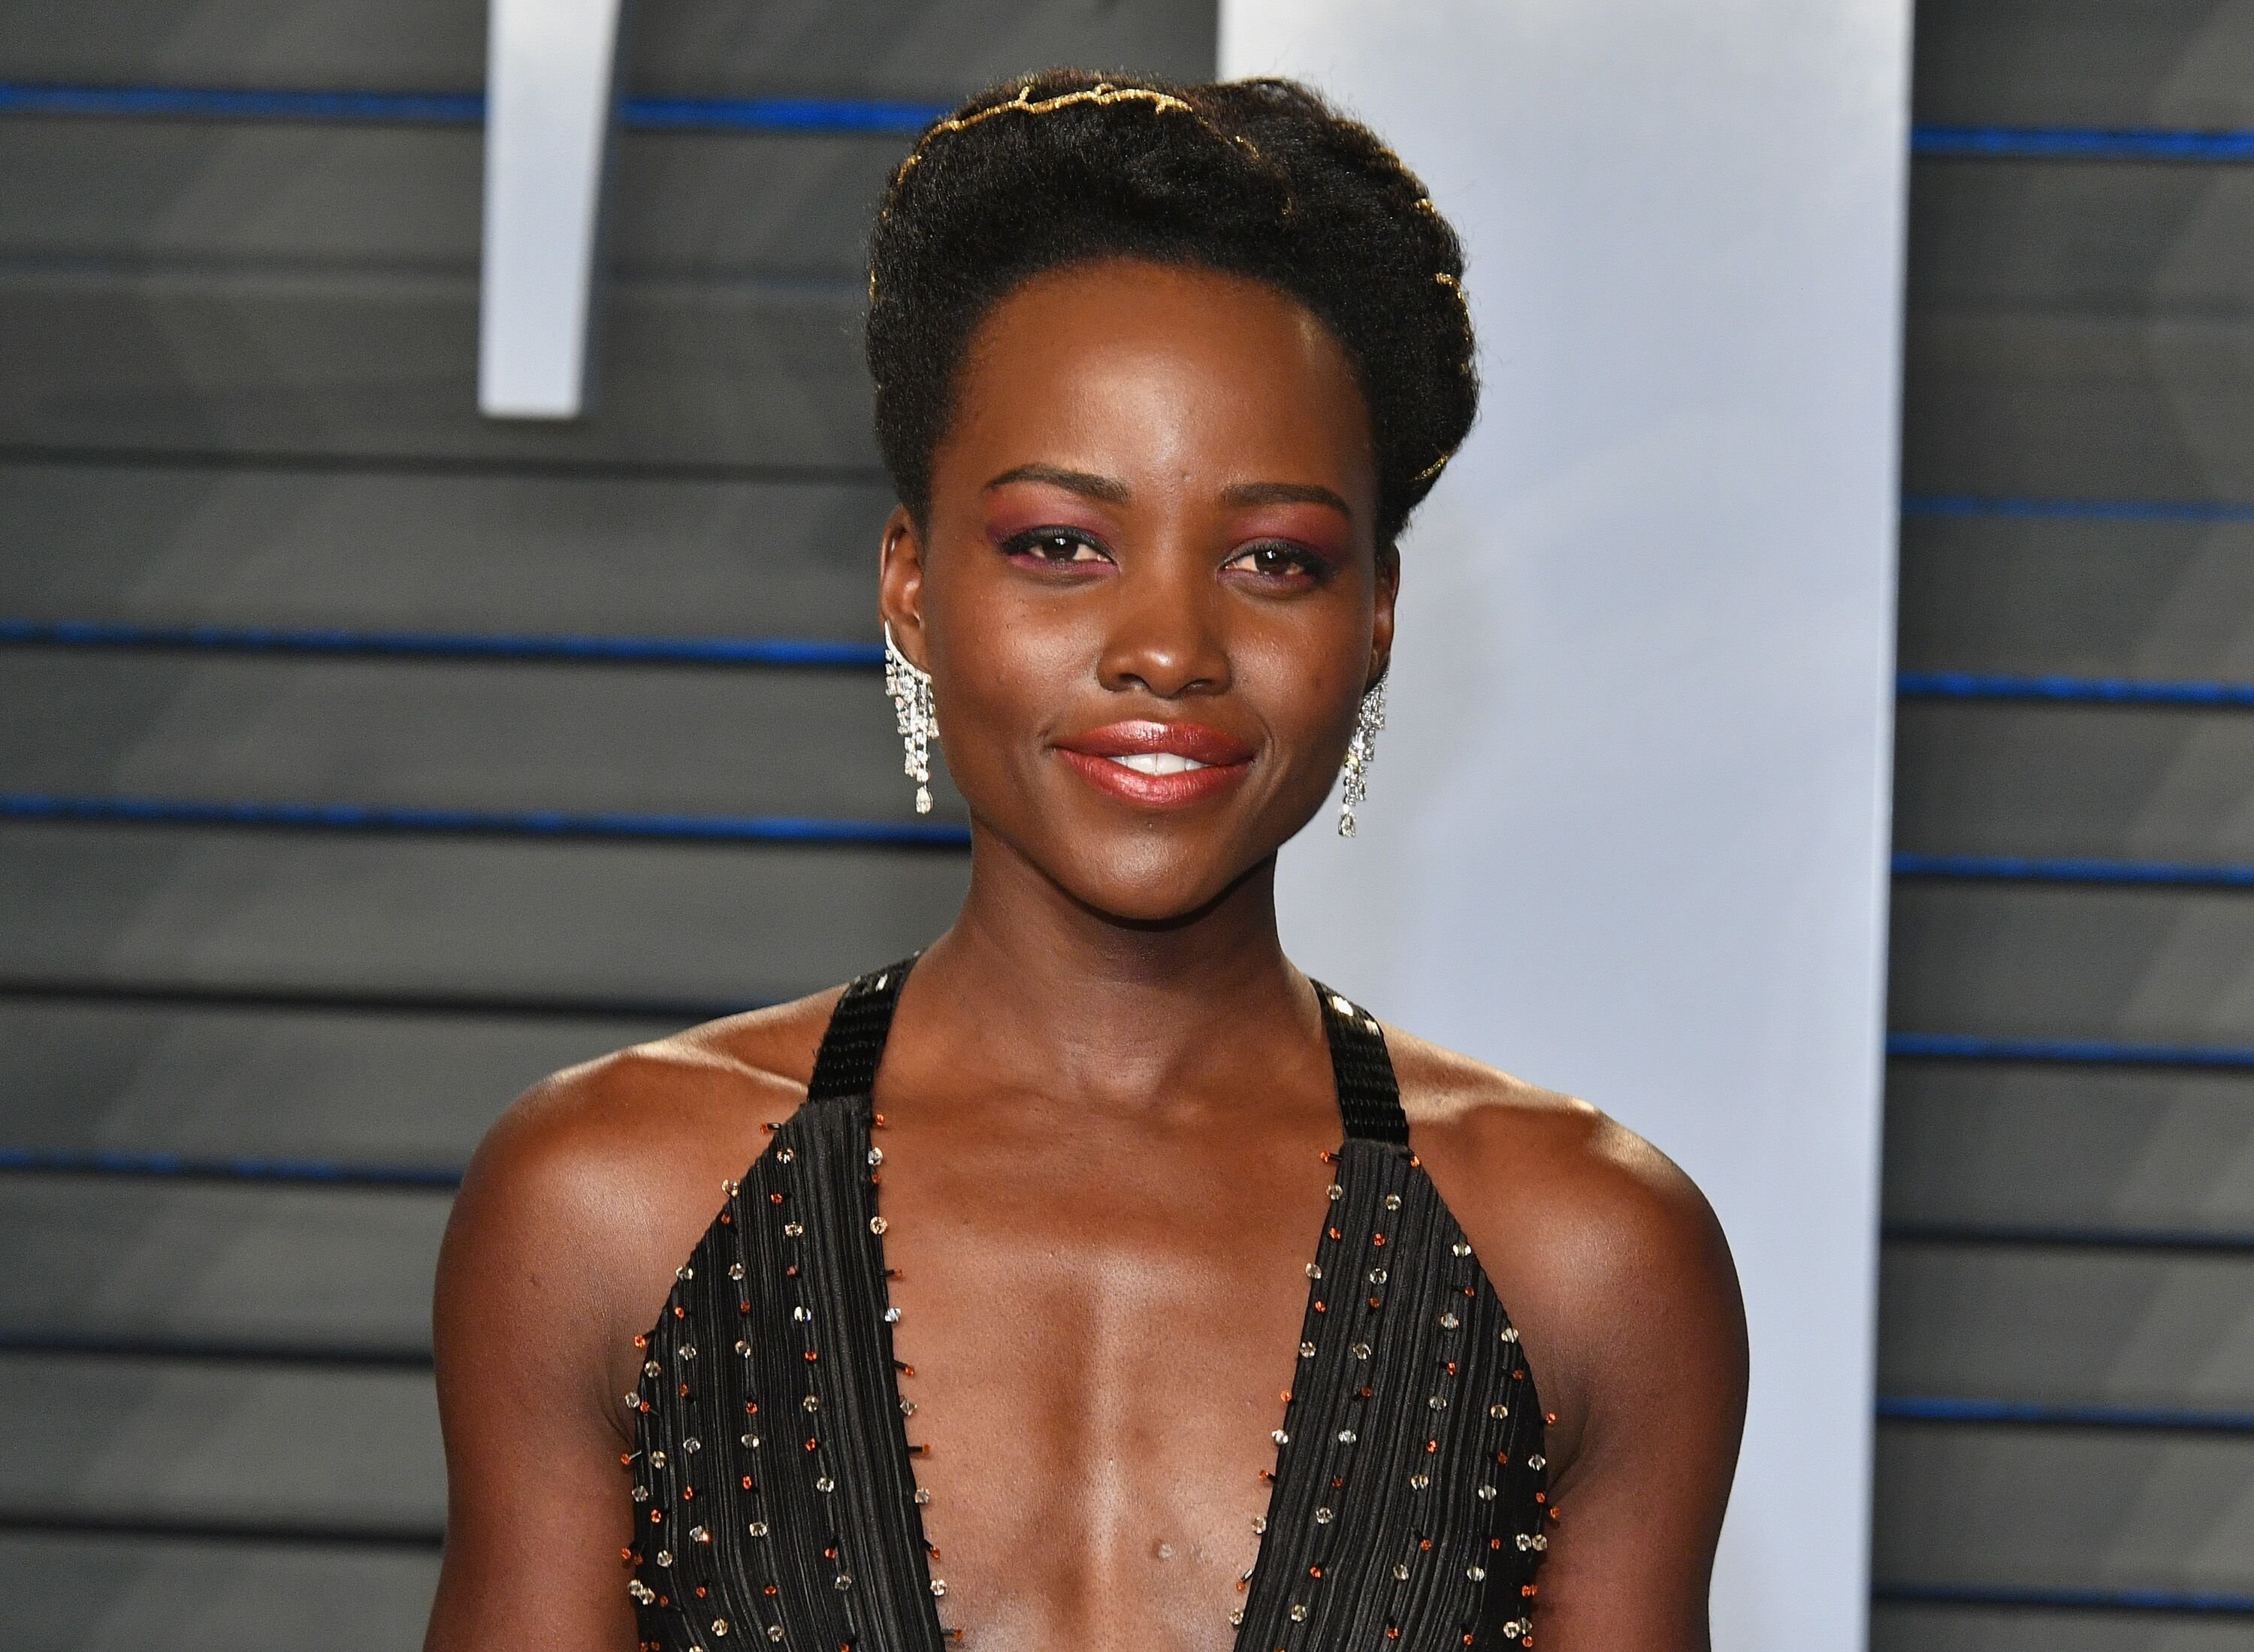 Lupita Nyong'o at the Vanity Fair Oscars Party 2018 | Source: Getty Images/GlobalImagesUkraine